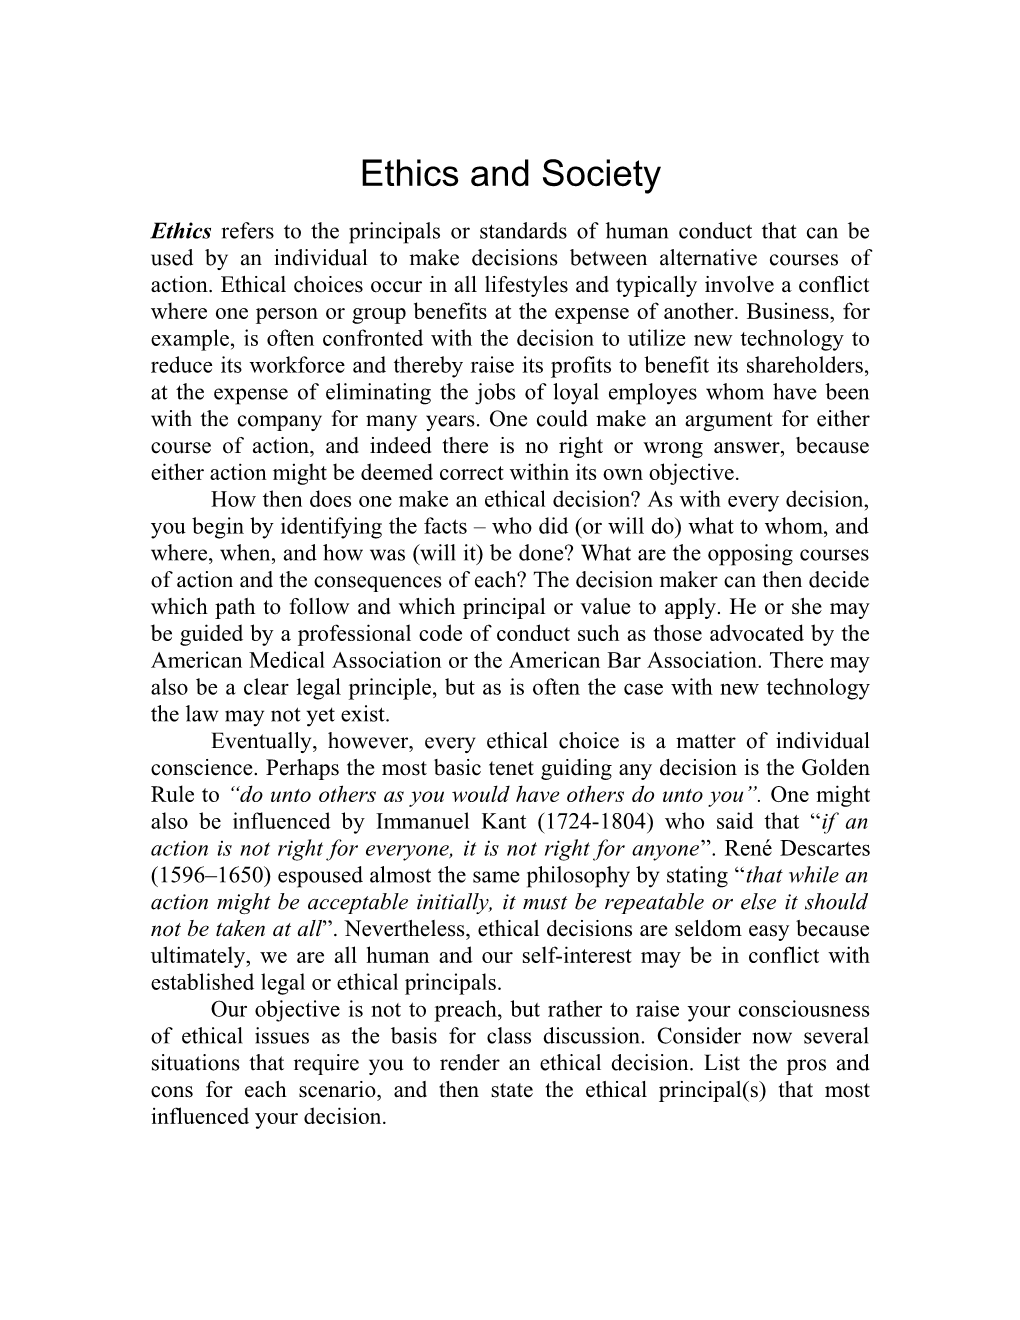 Ethics and Other Issues